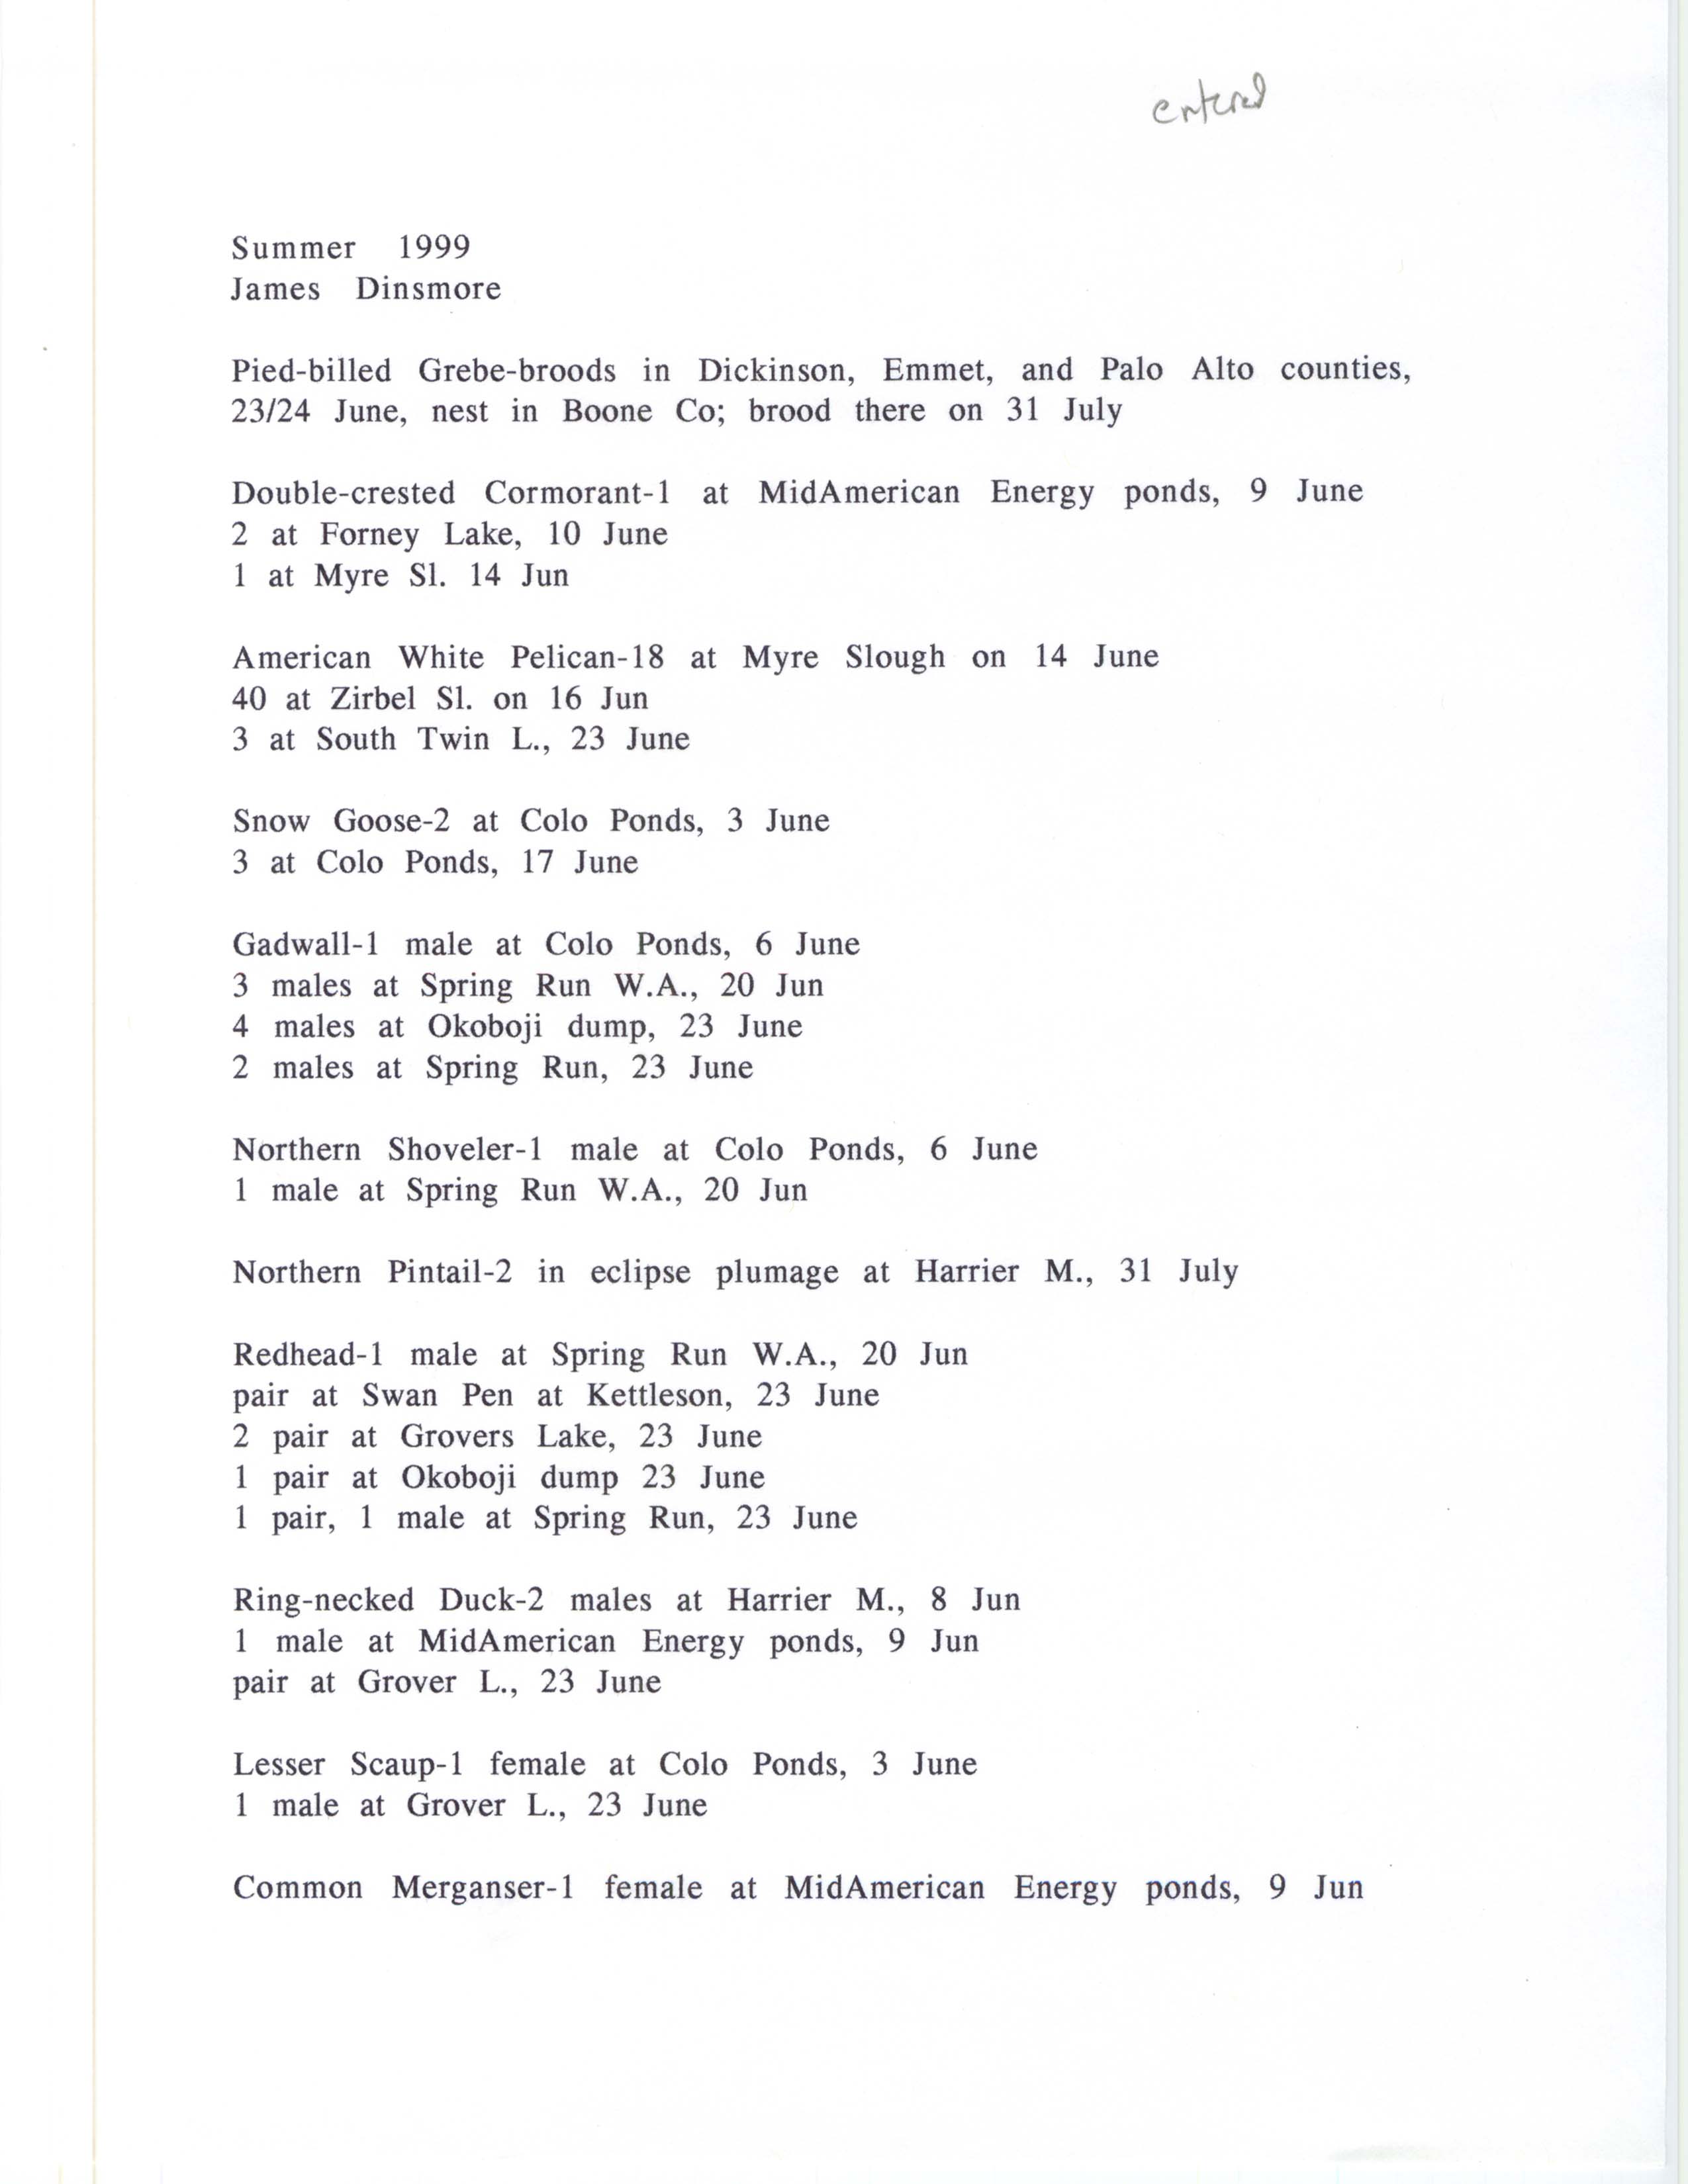 Annotated bird sighting list for summer 1999 compiled by James Dinsmore